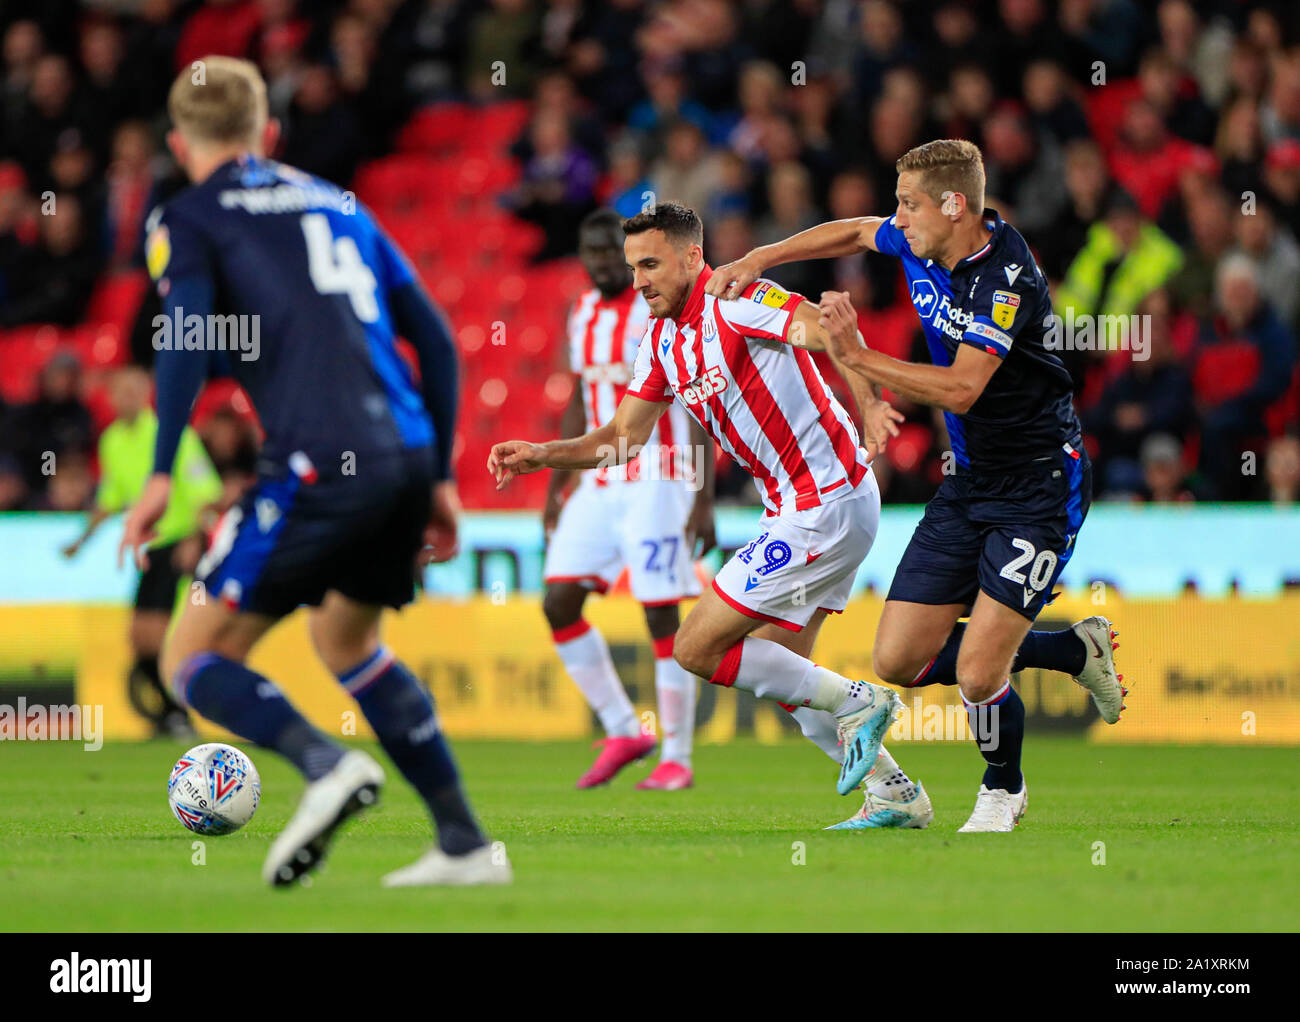 27th September 2019, Bet365 Stadium, Stoke-on-Trent, England; Sky Bet Championship, Stoke City v Nottingham Forest : Lee Gregory (19) of Stoke City is challenged by Michael Dawson (20) of Nottingham Forest Credit: Conor Molloy/News Images Stock Photo